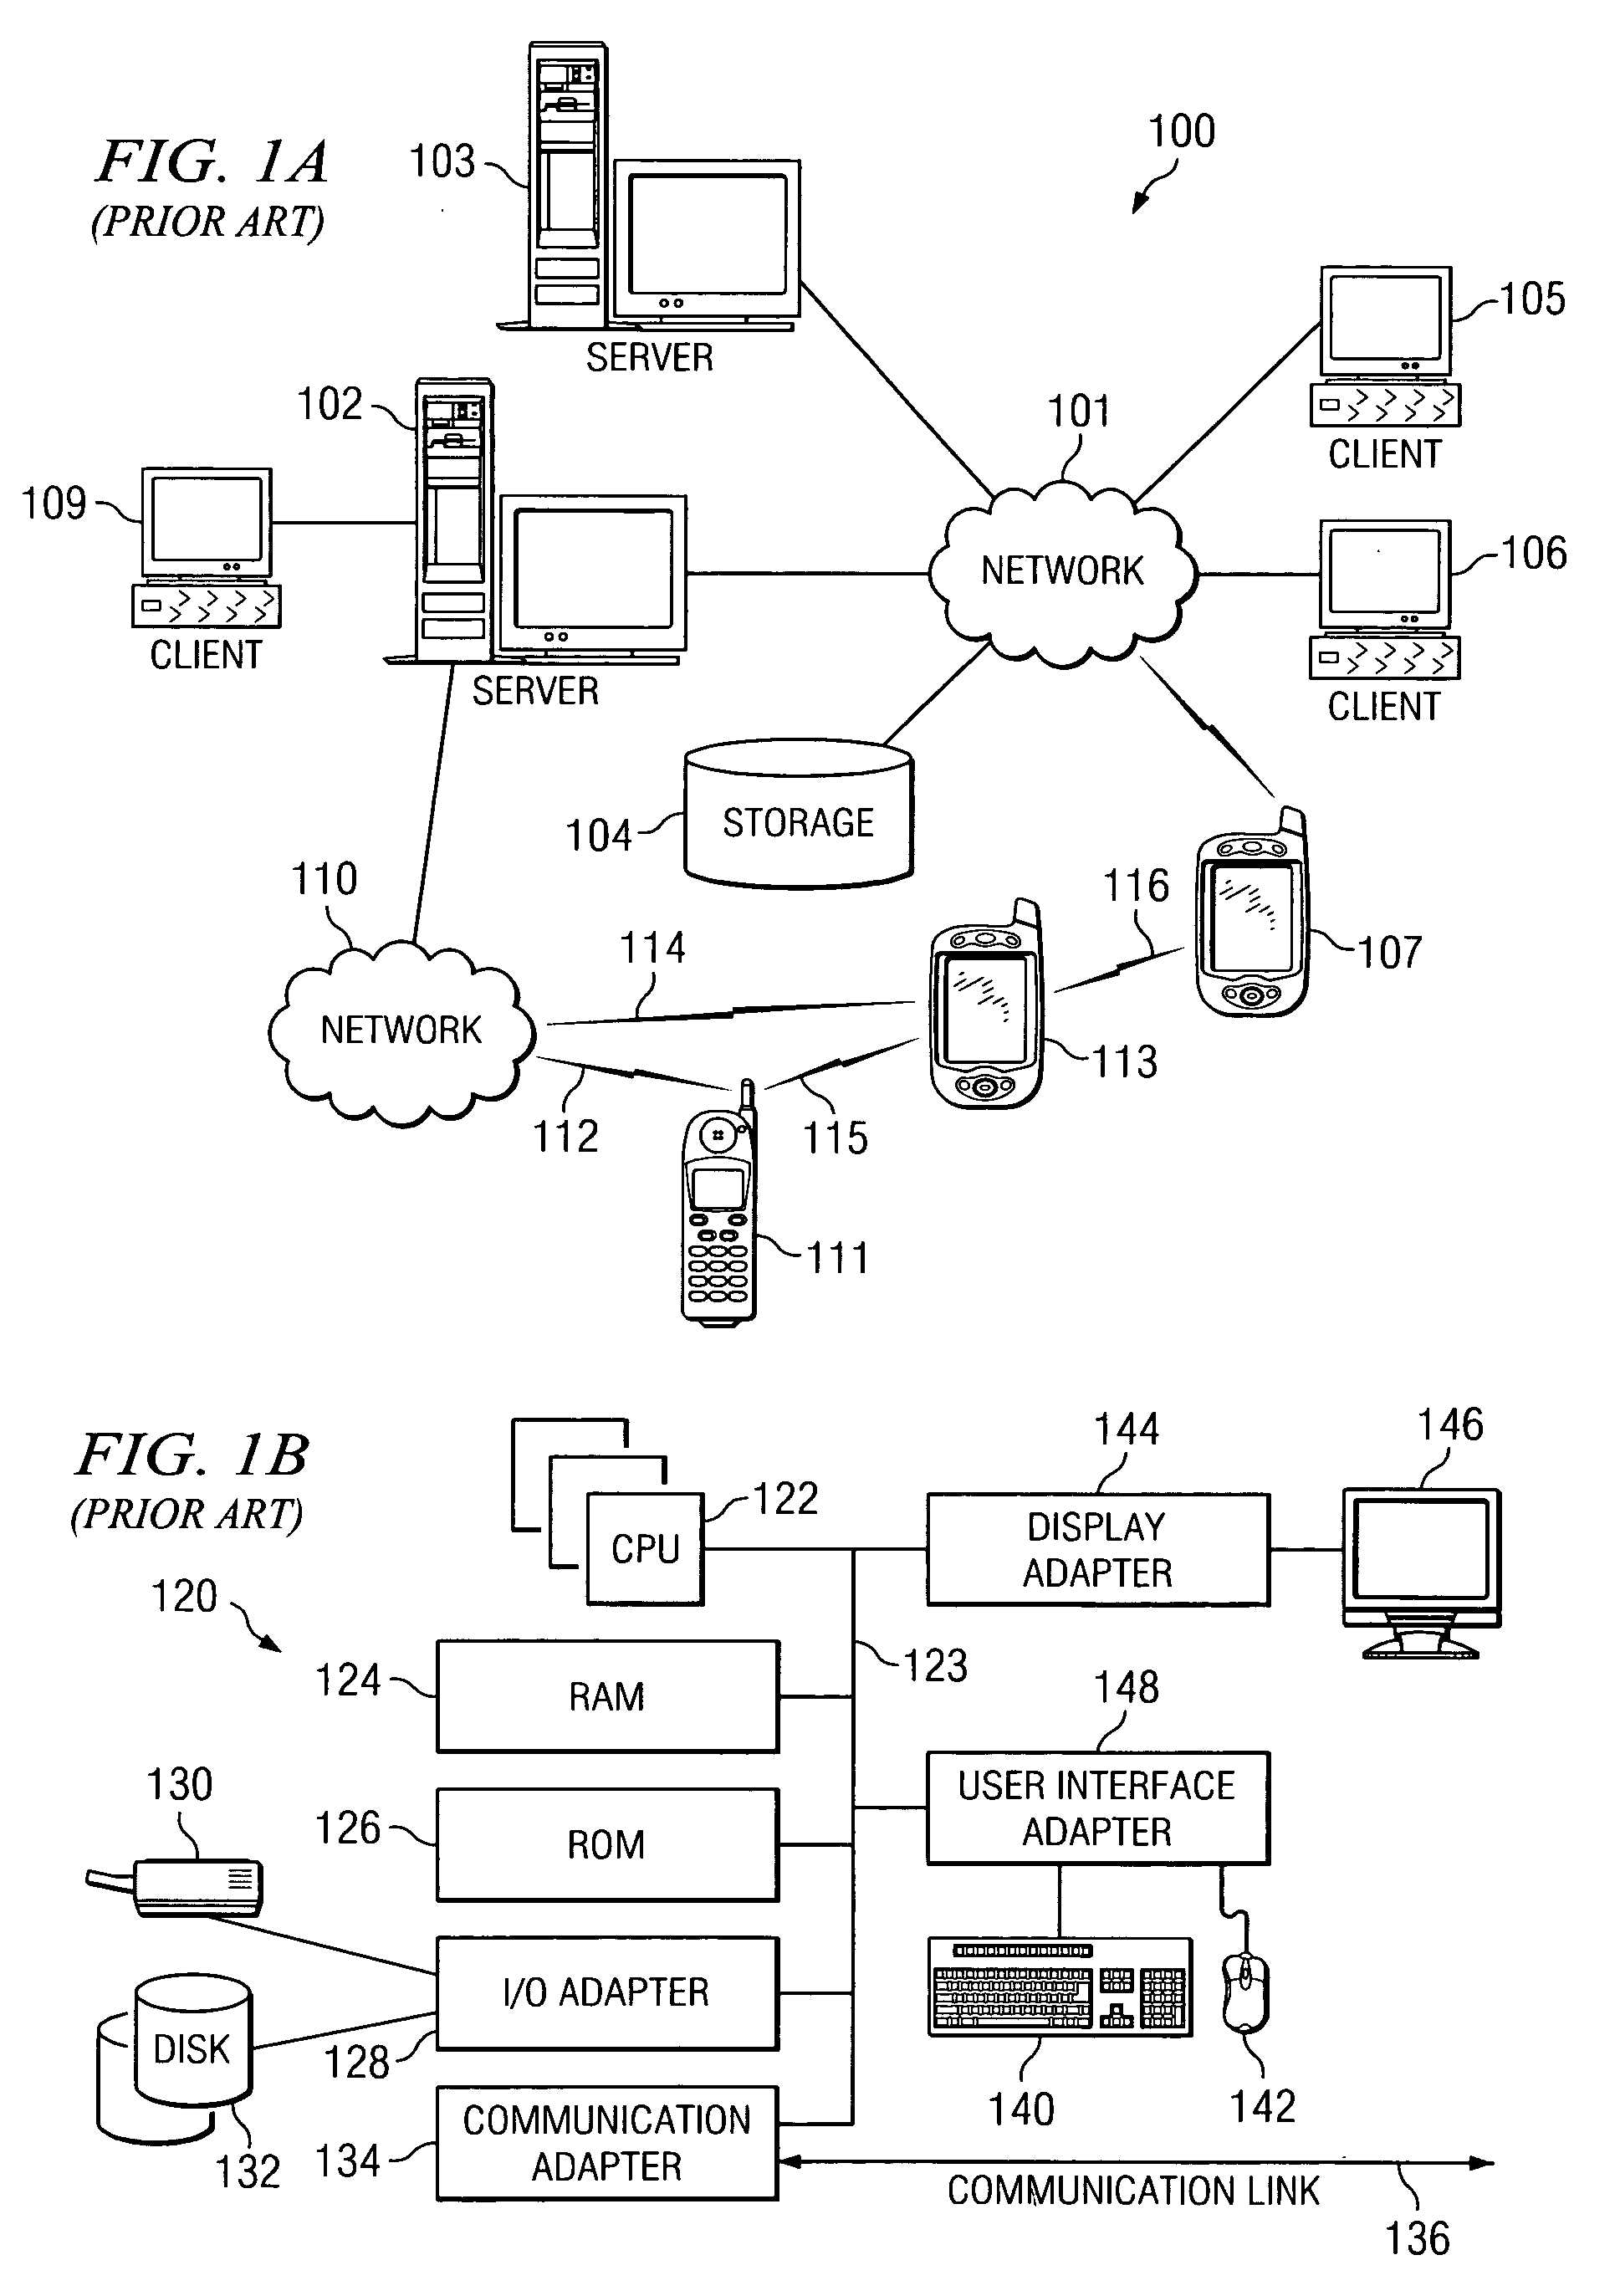 Method, apparatus, and product for prohibiting unauthorized access of data stored on storage drives